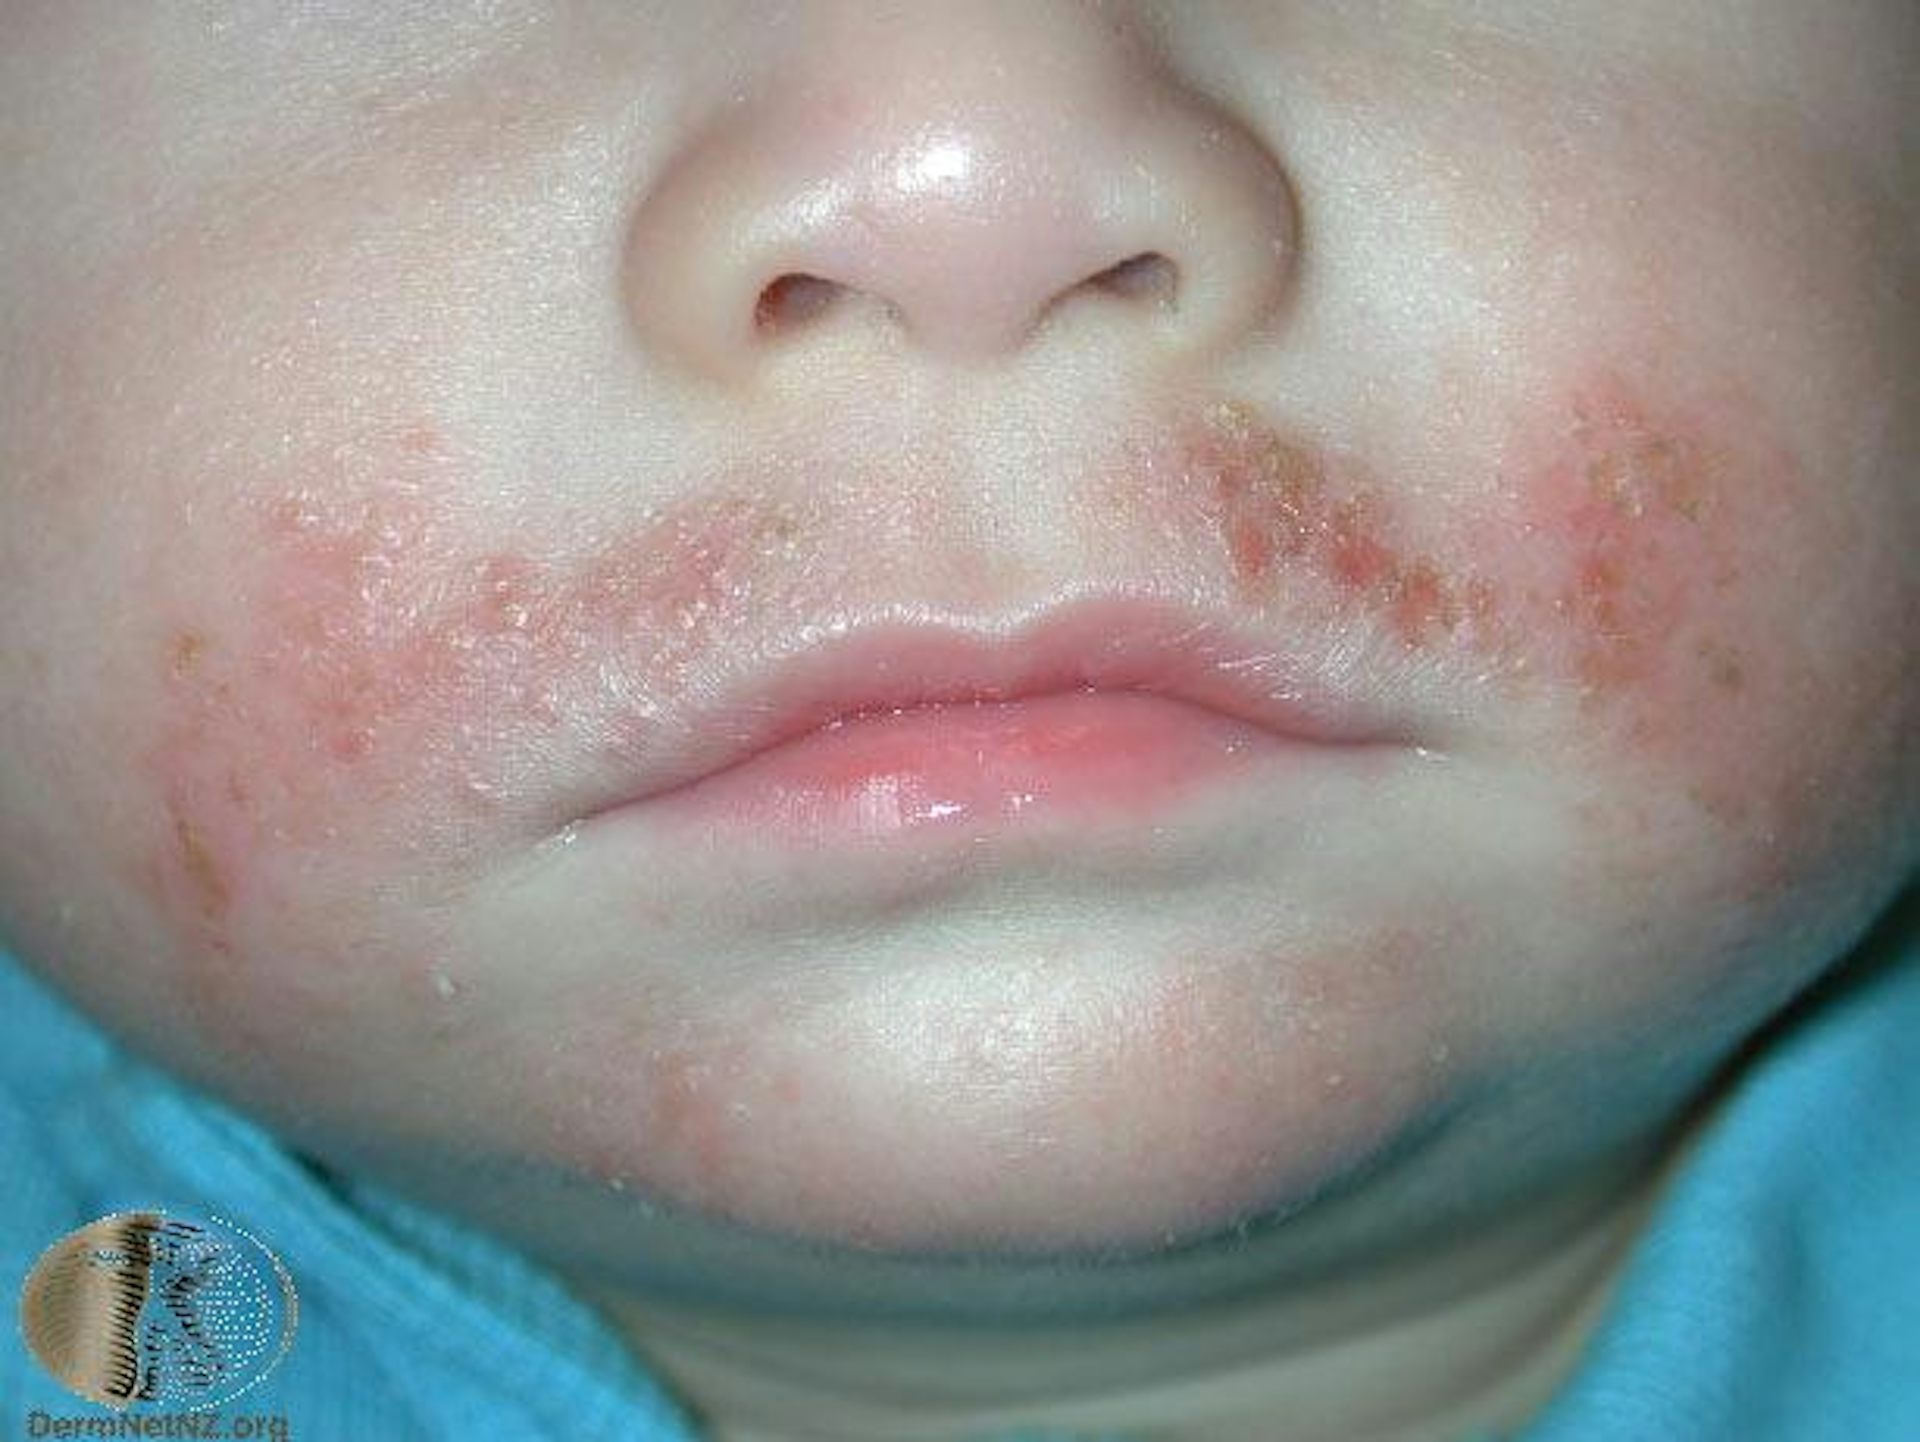 Yeast infection facial rash fever